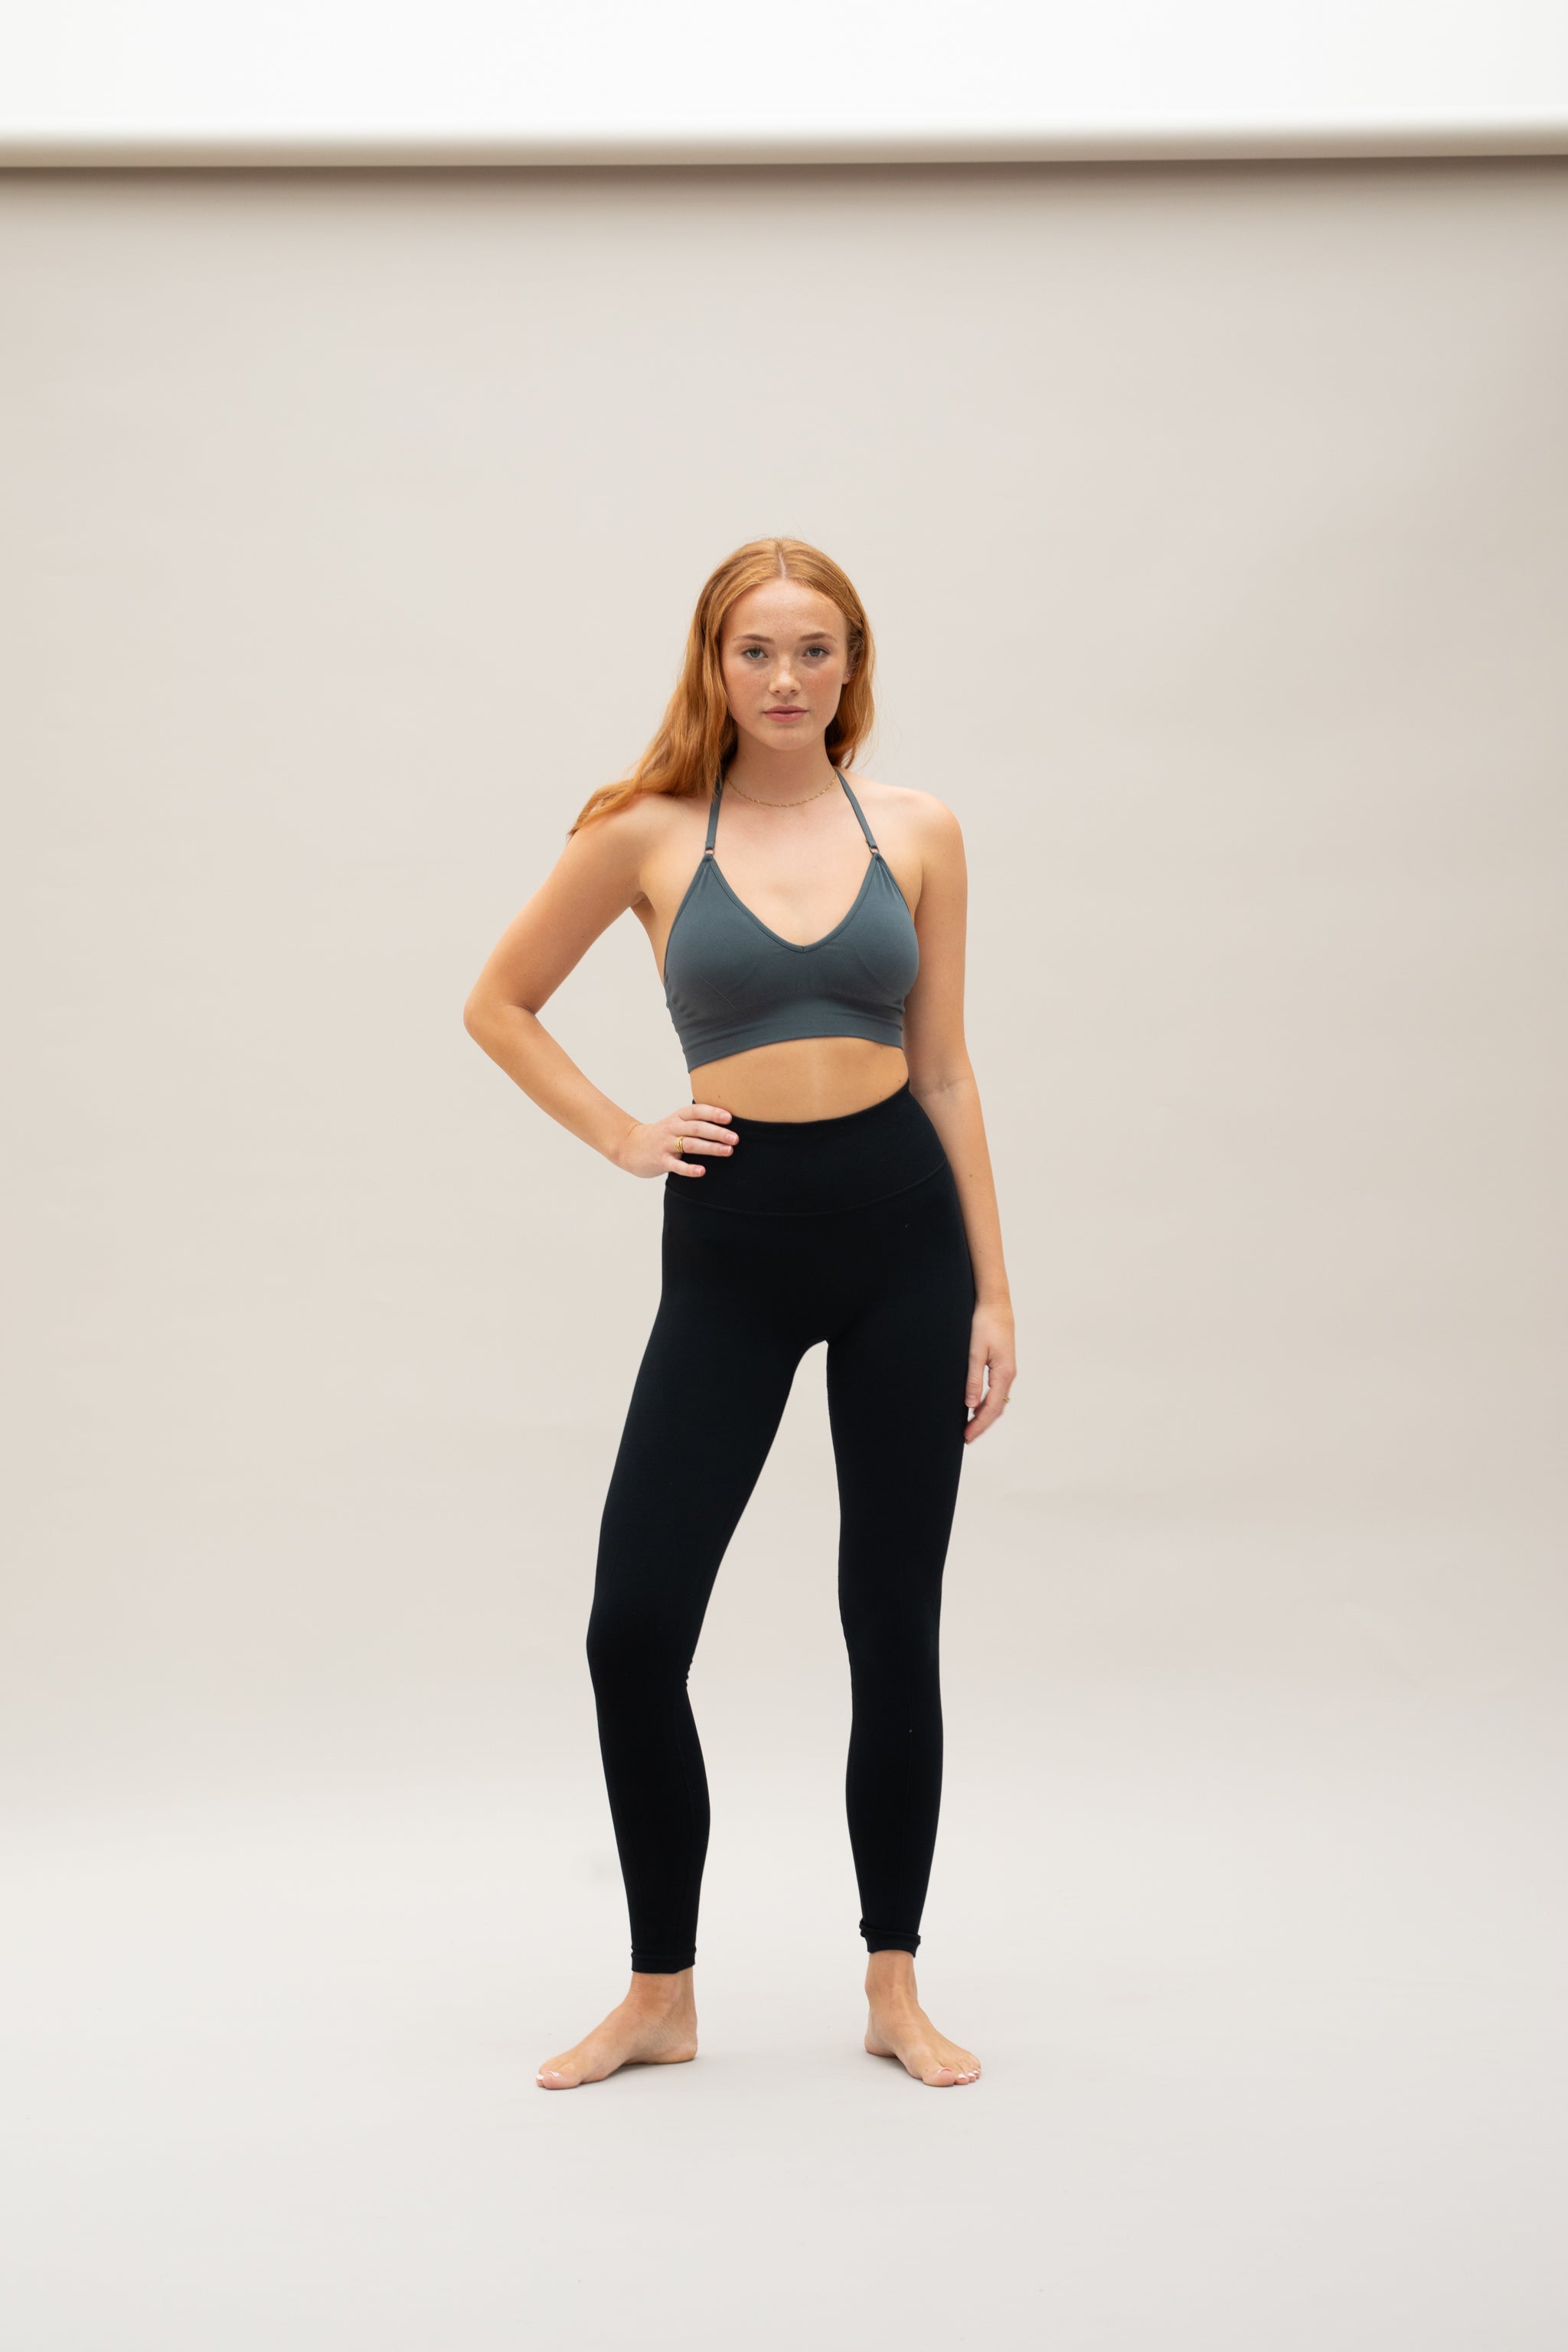 Model wearing black leggings and supportive sports bra for sustainable activewear brand, Jilla.